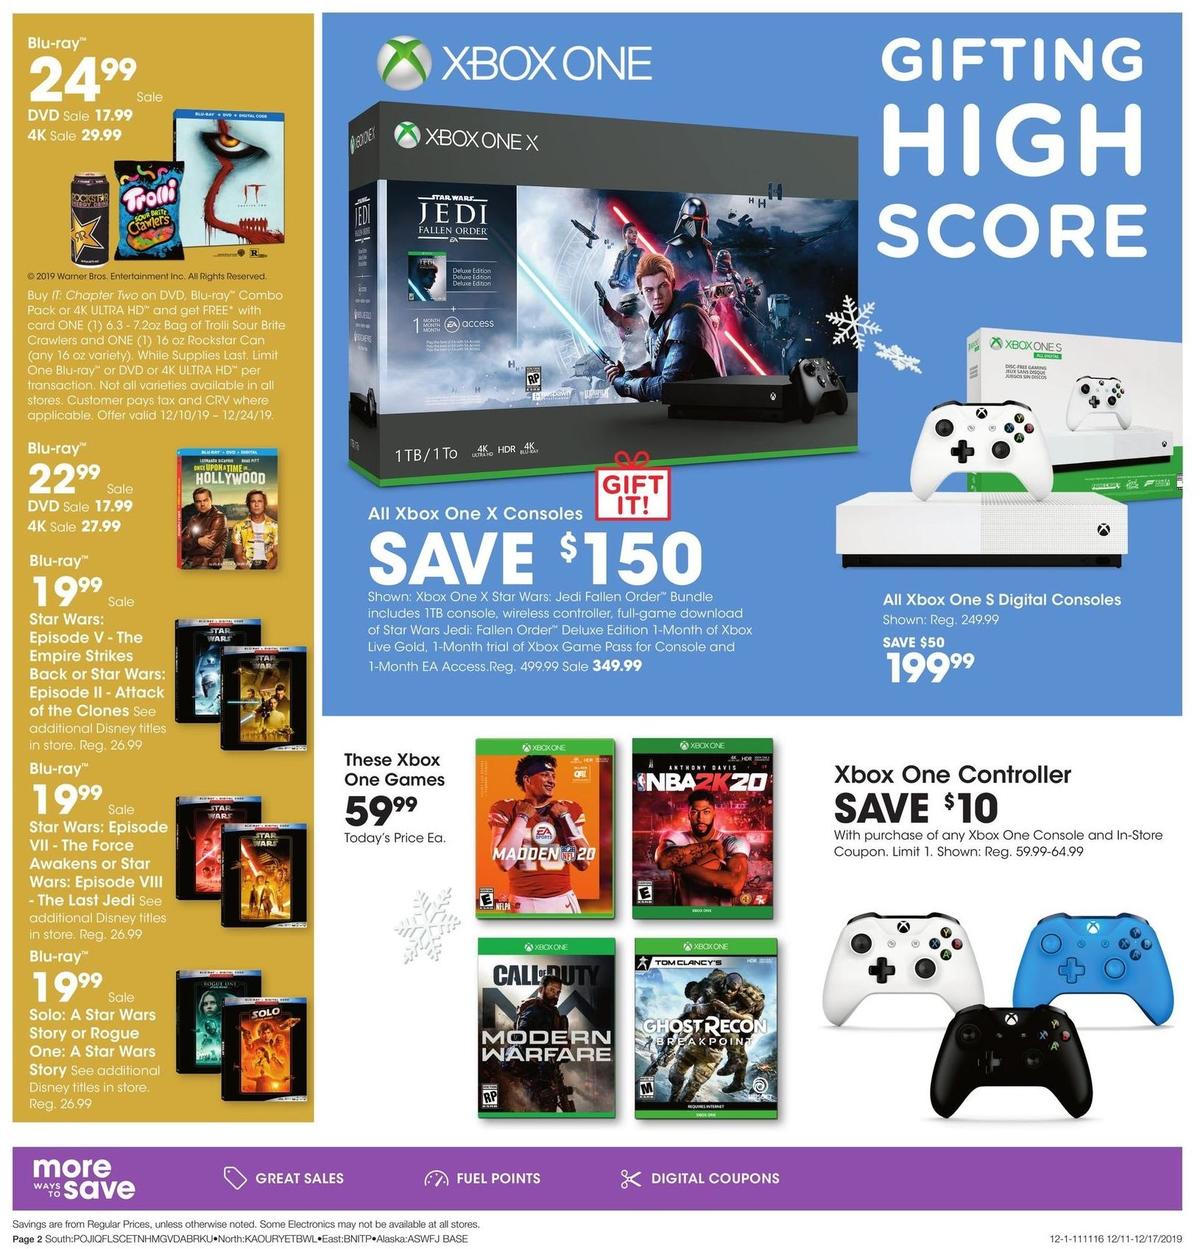 Fred Meyer Electronics & Apparel Weekly Ad from December 11